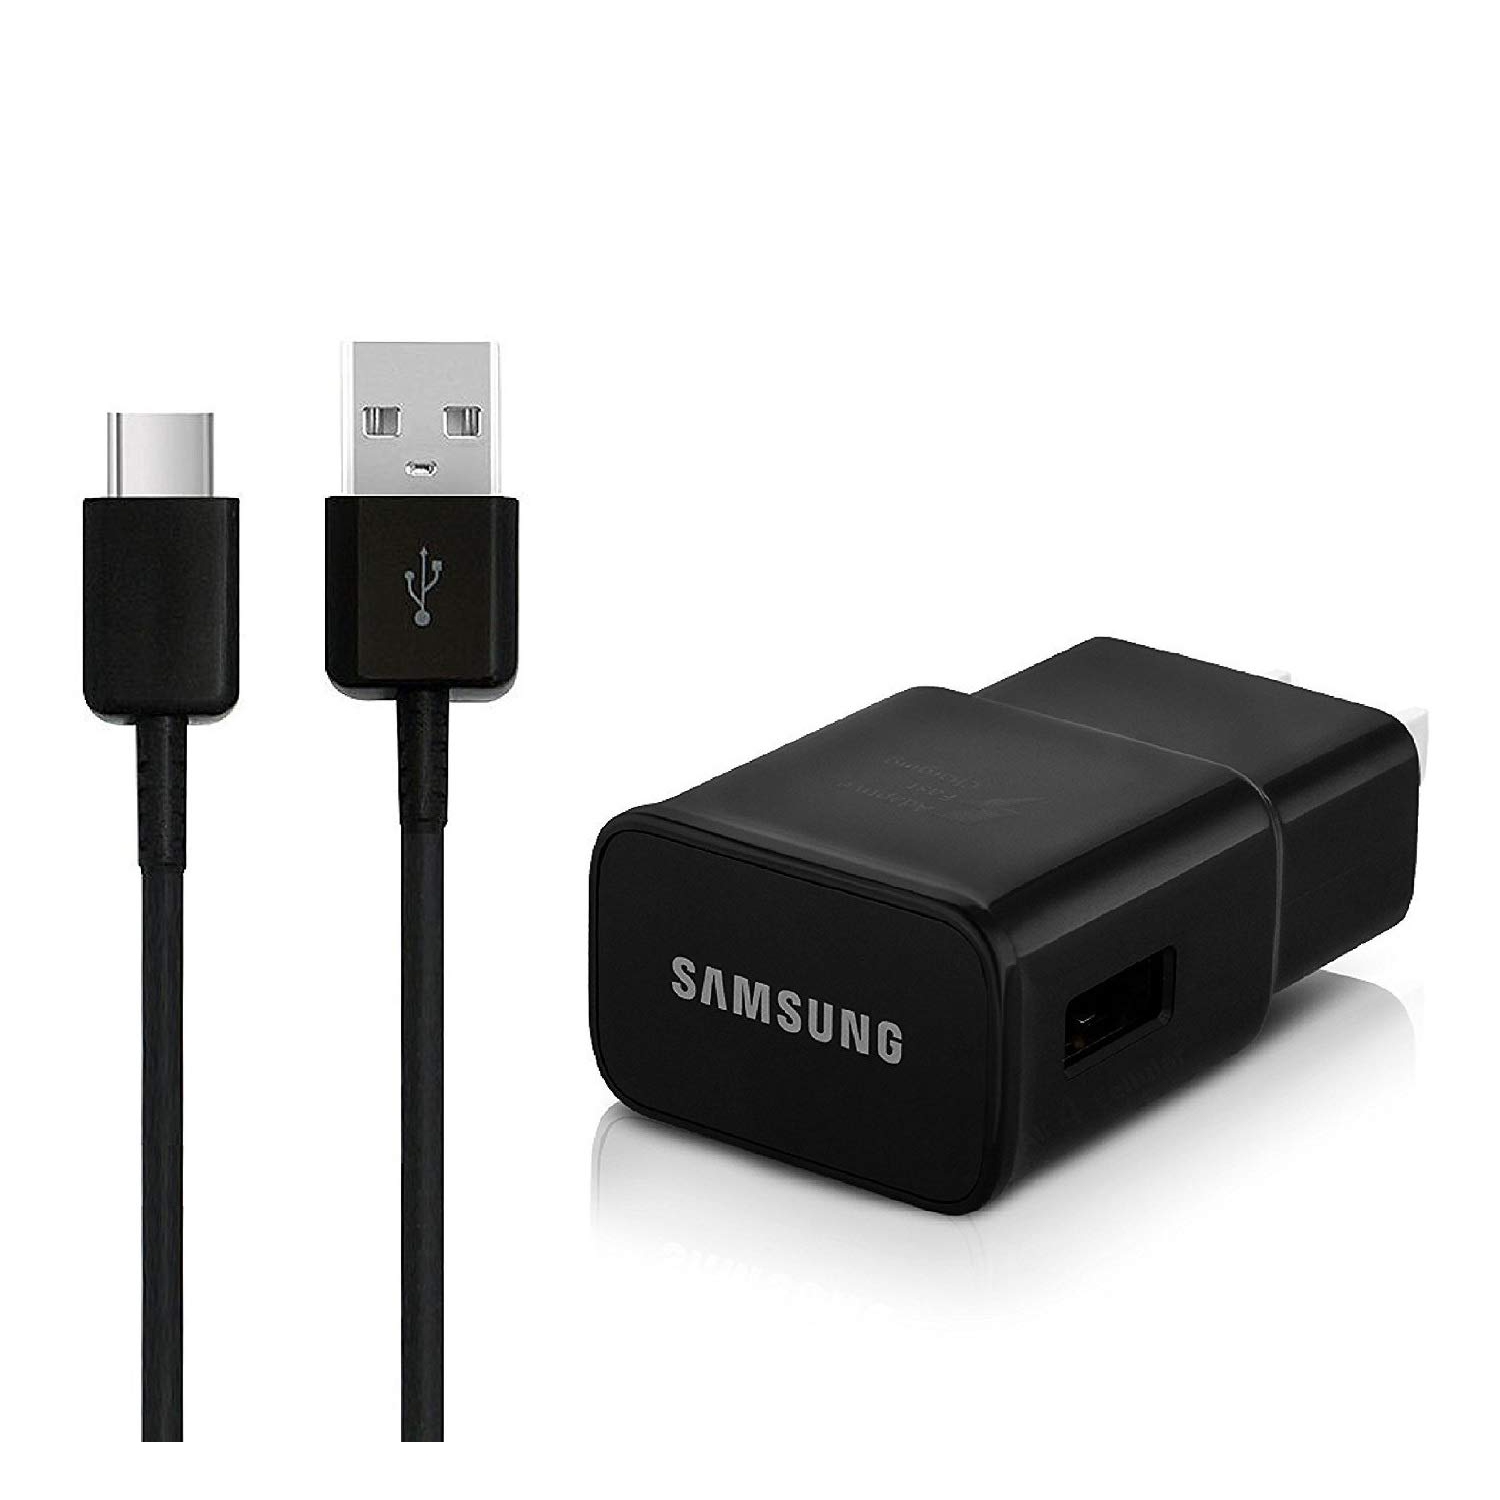 2 X Fast Adaptive Wall Adapter Charger + 2 X Type C / USB-C Cable For Samsung Galaxy tab A 8.0 (2019) , Tab S3 , Tab S4